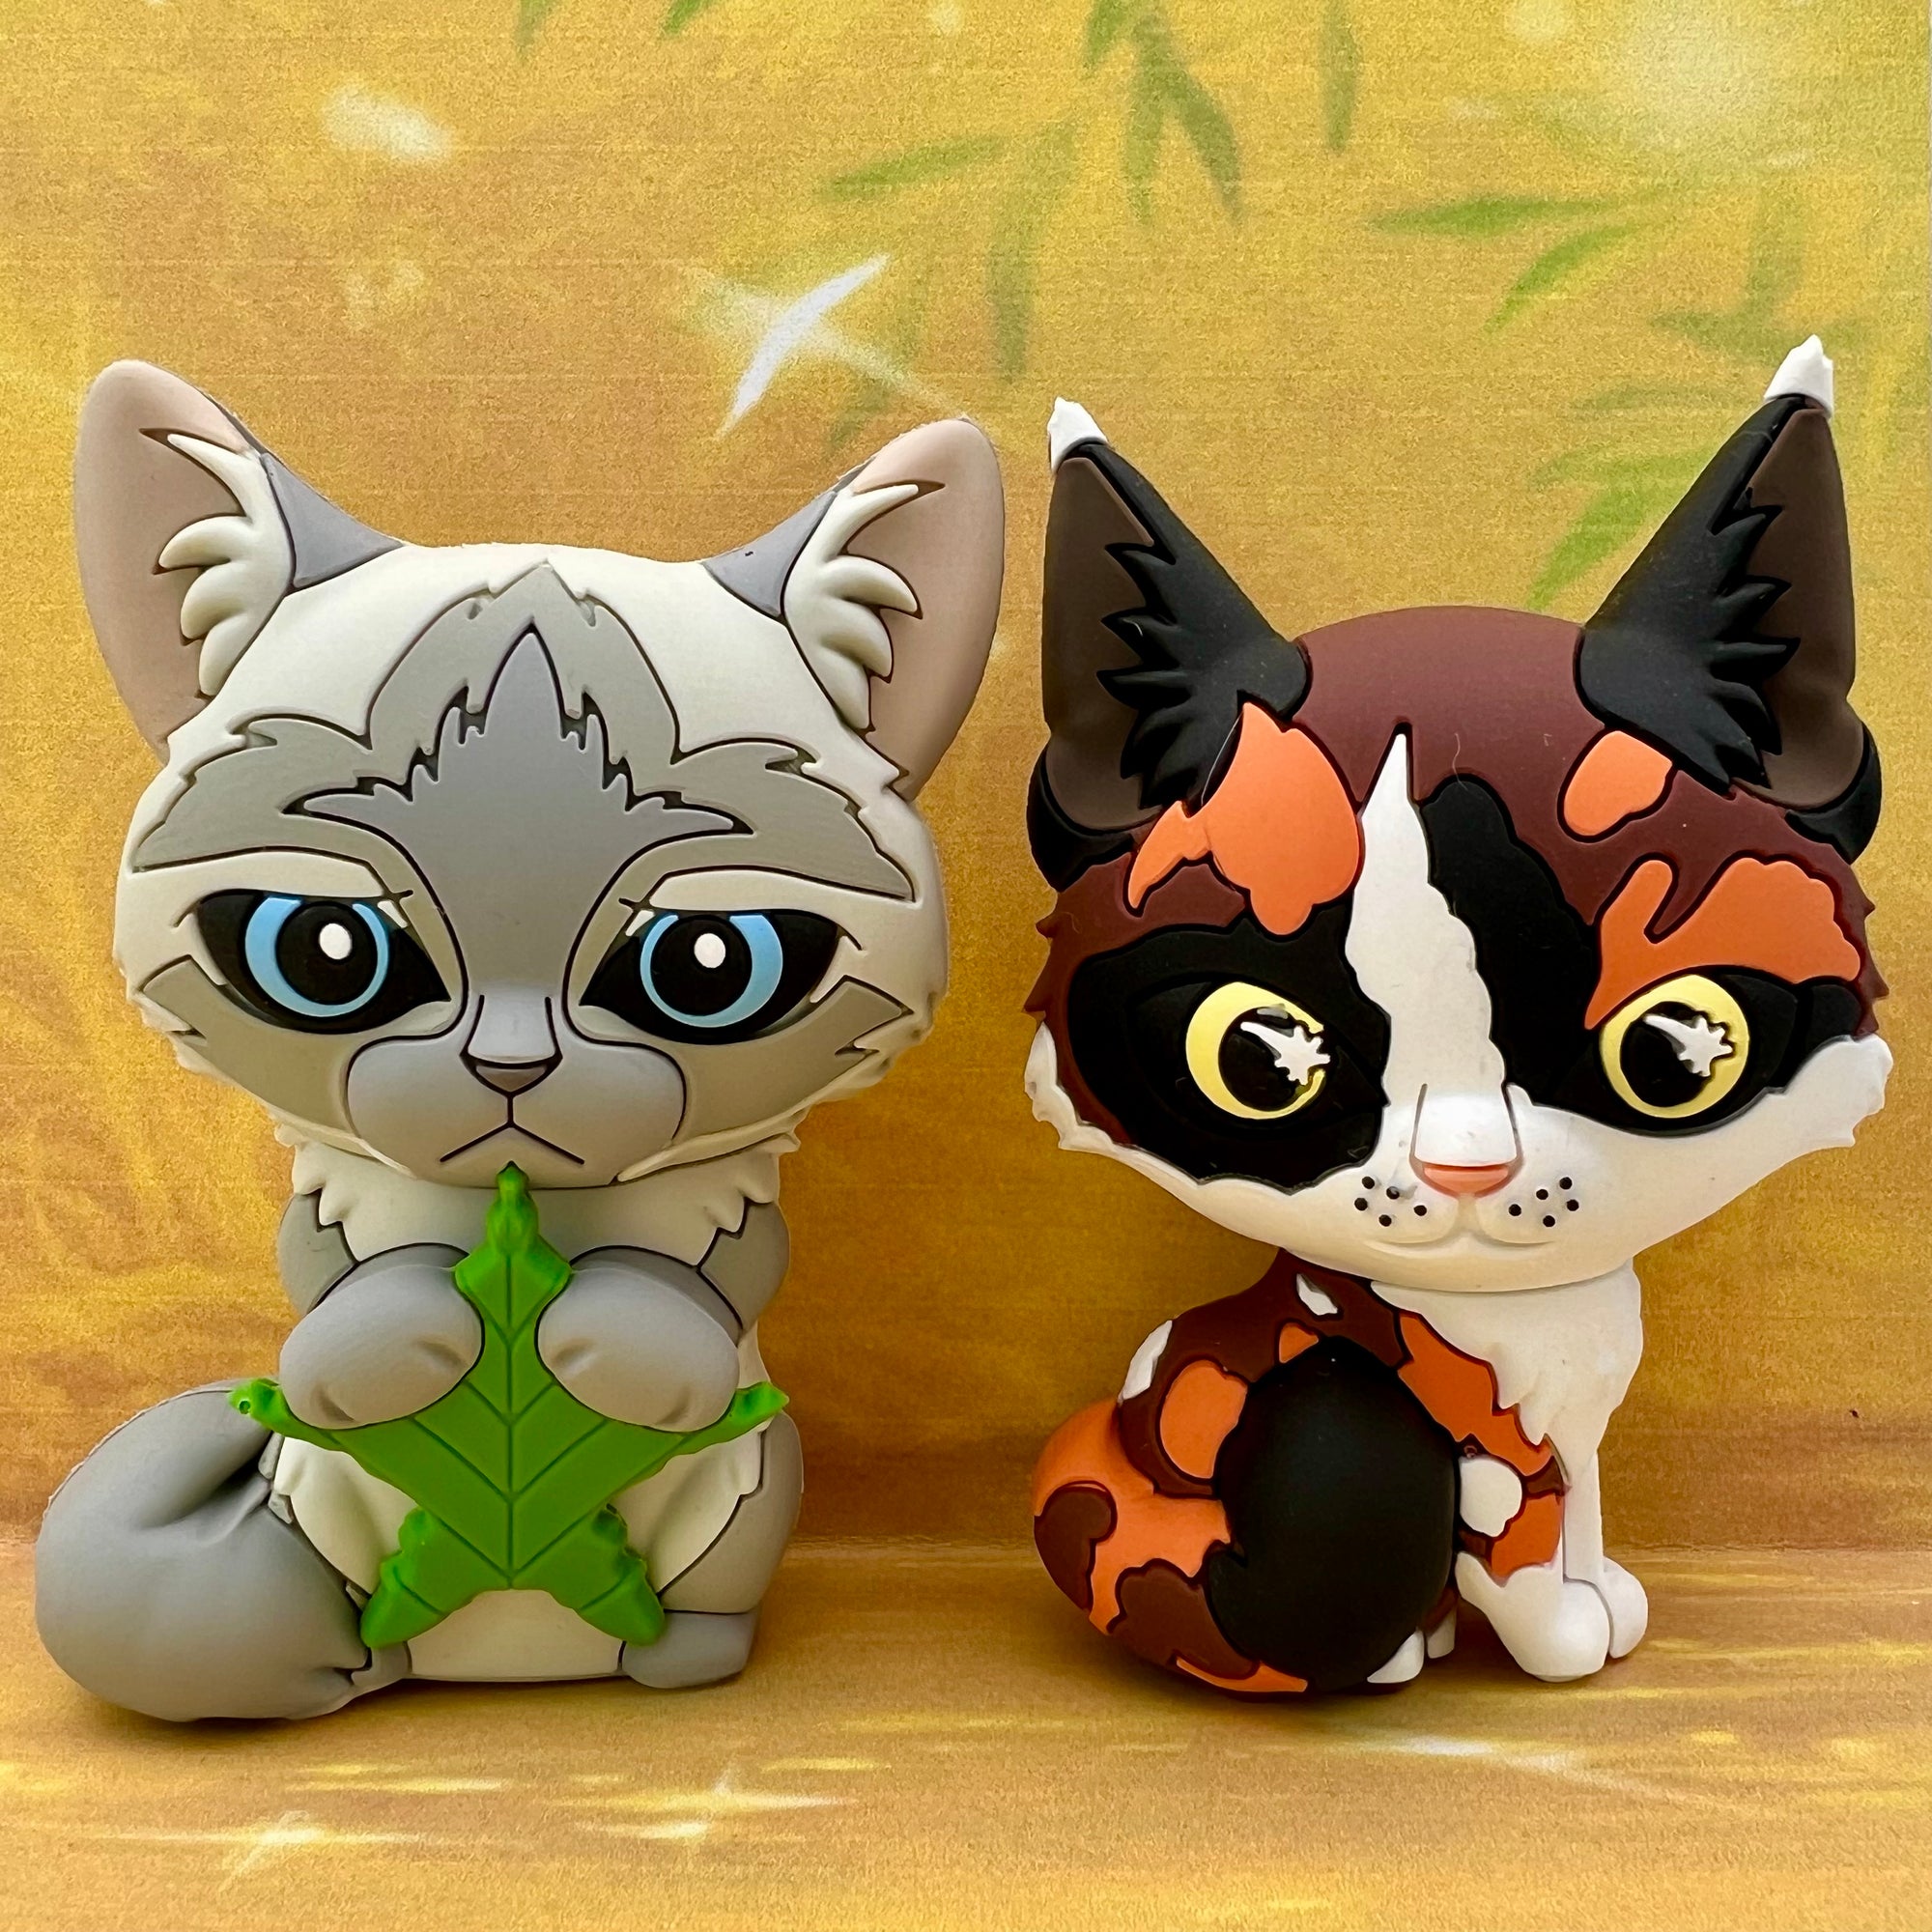 Mini Maker Series  Official Warrior Cats Store